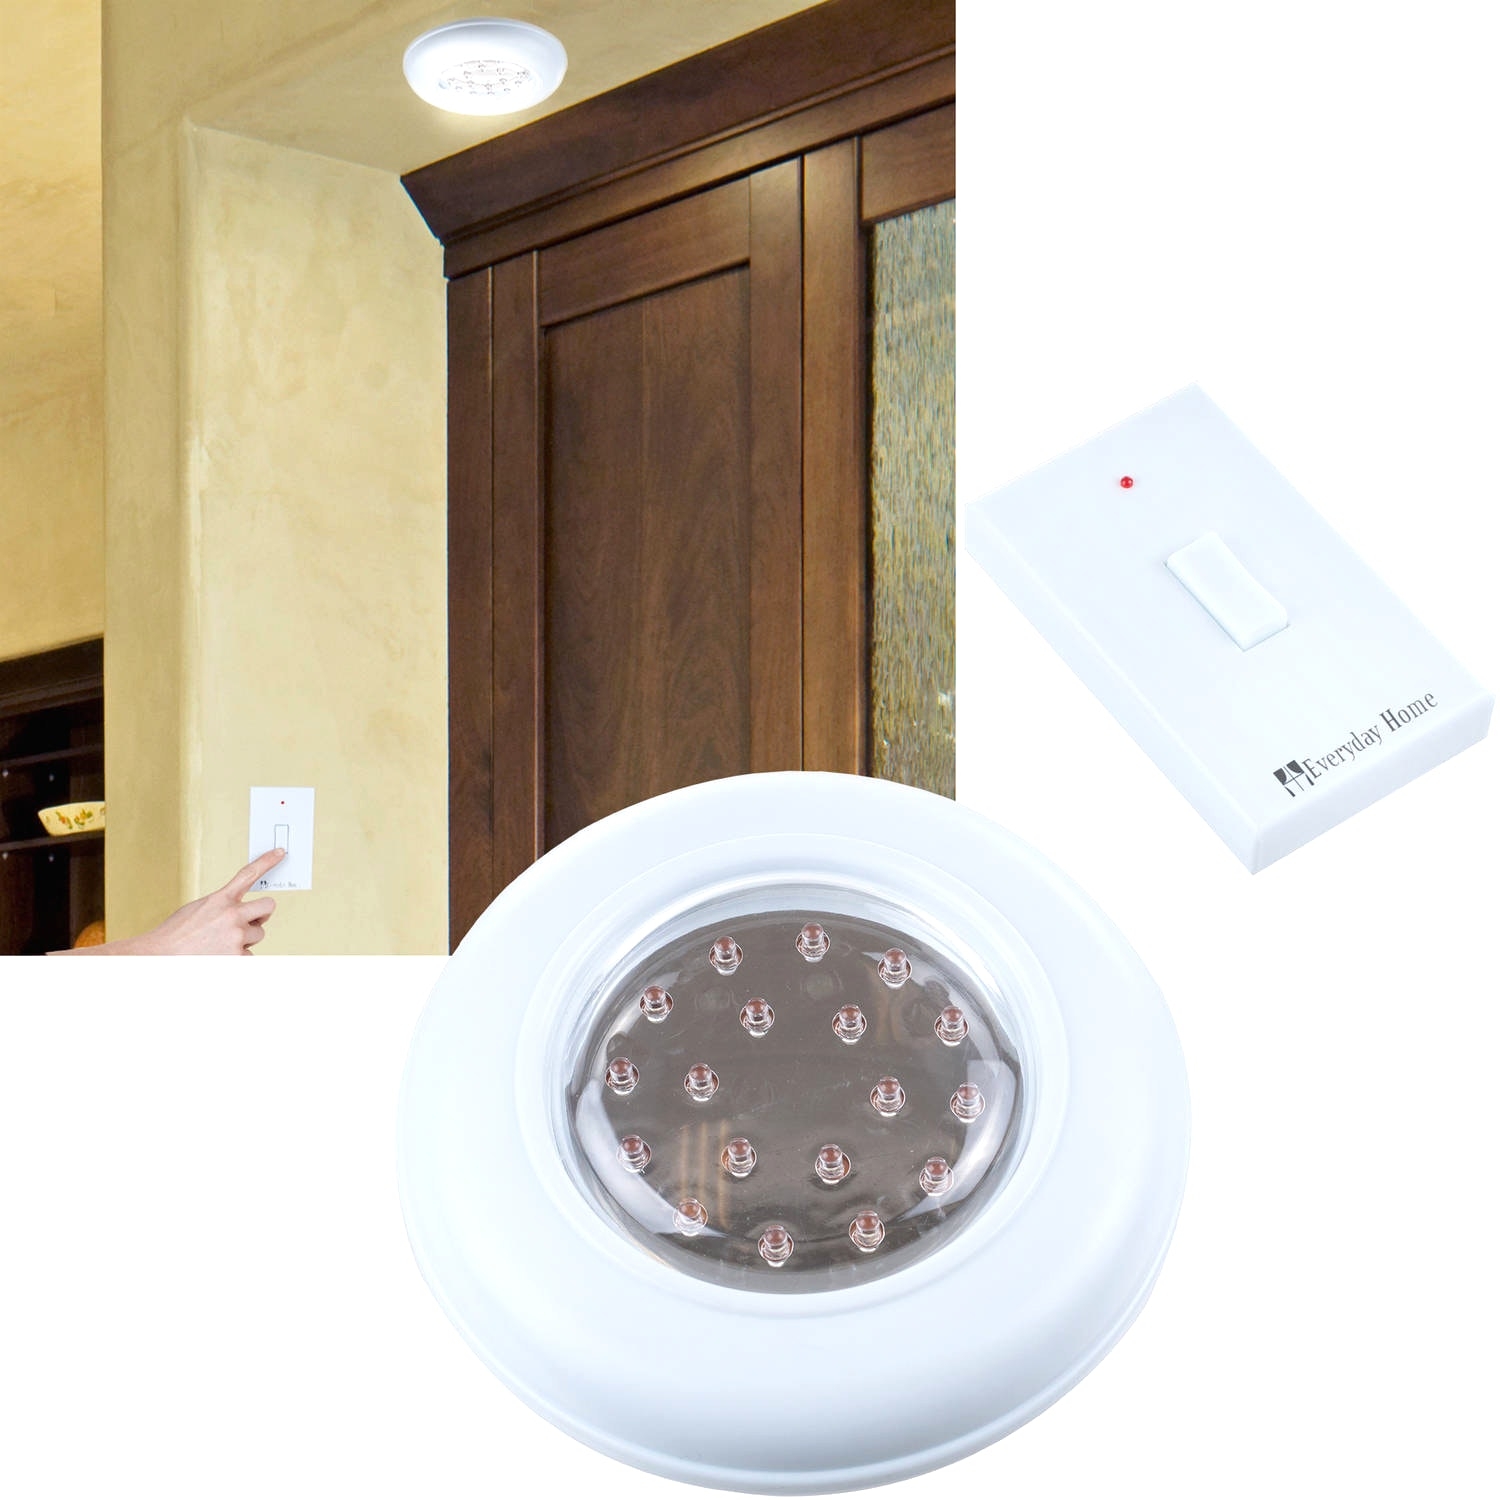 Remote Controlled Ceiling Light Switch